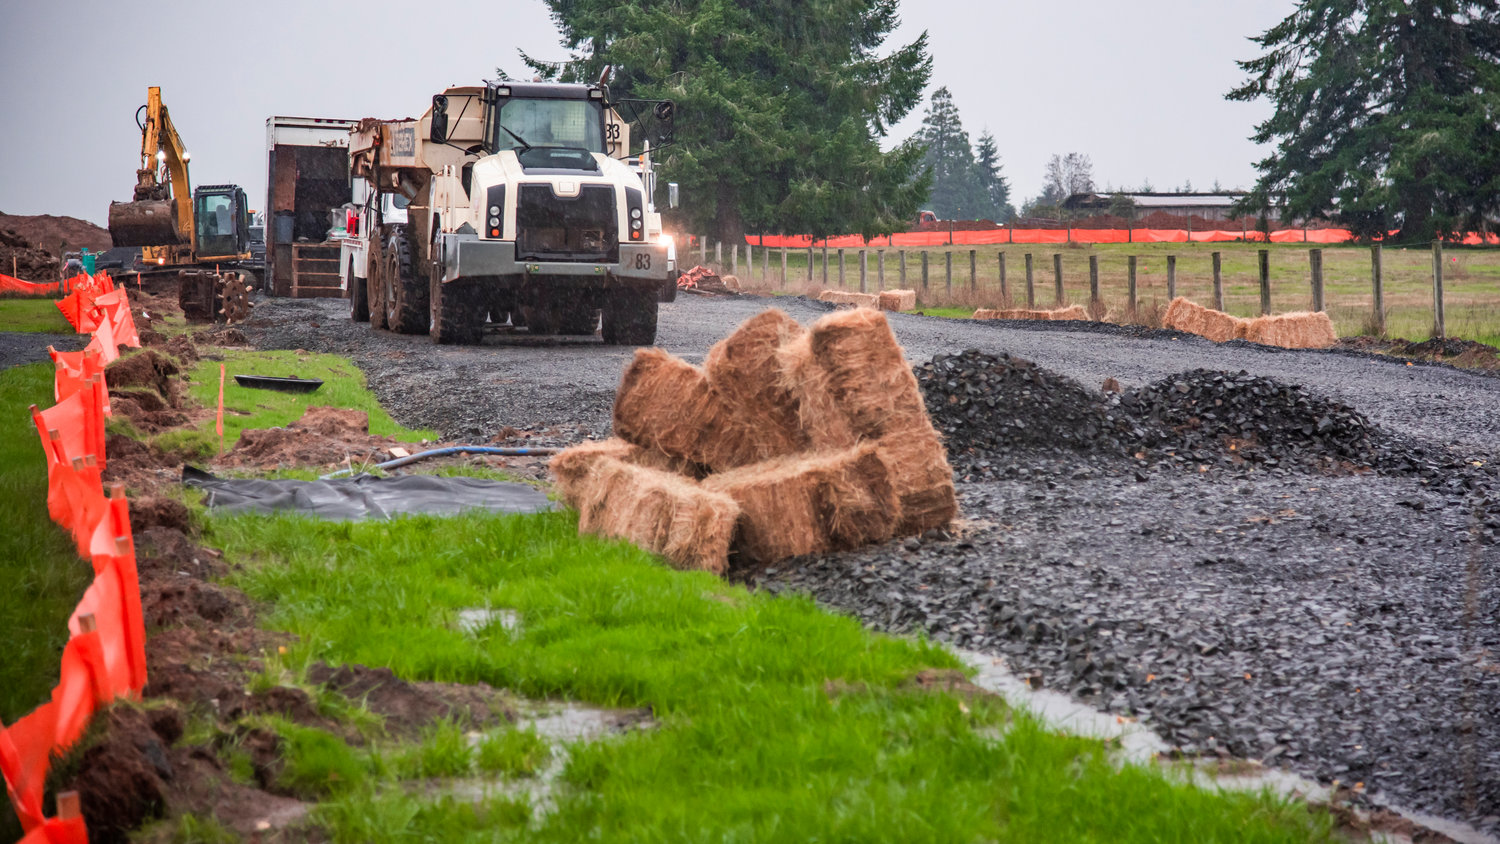 Bales of hay are used to mitigate water flow during a residential construction project in Winlock.